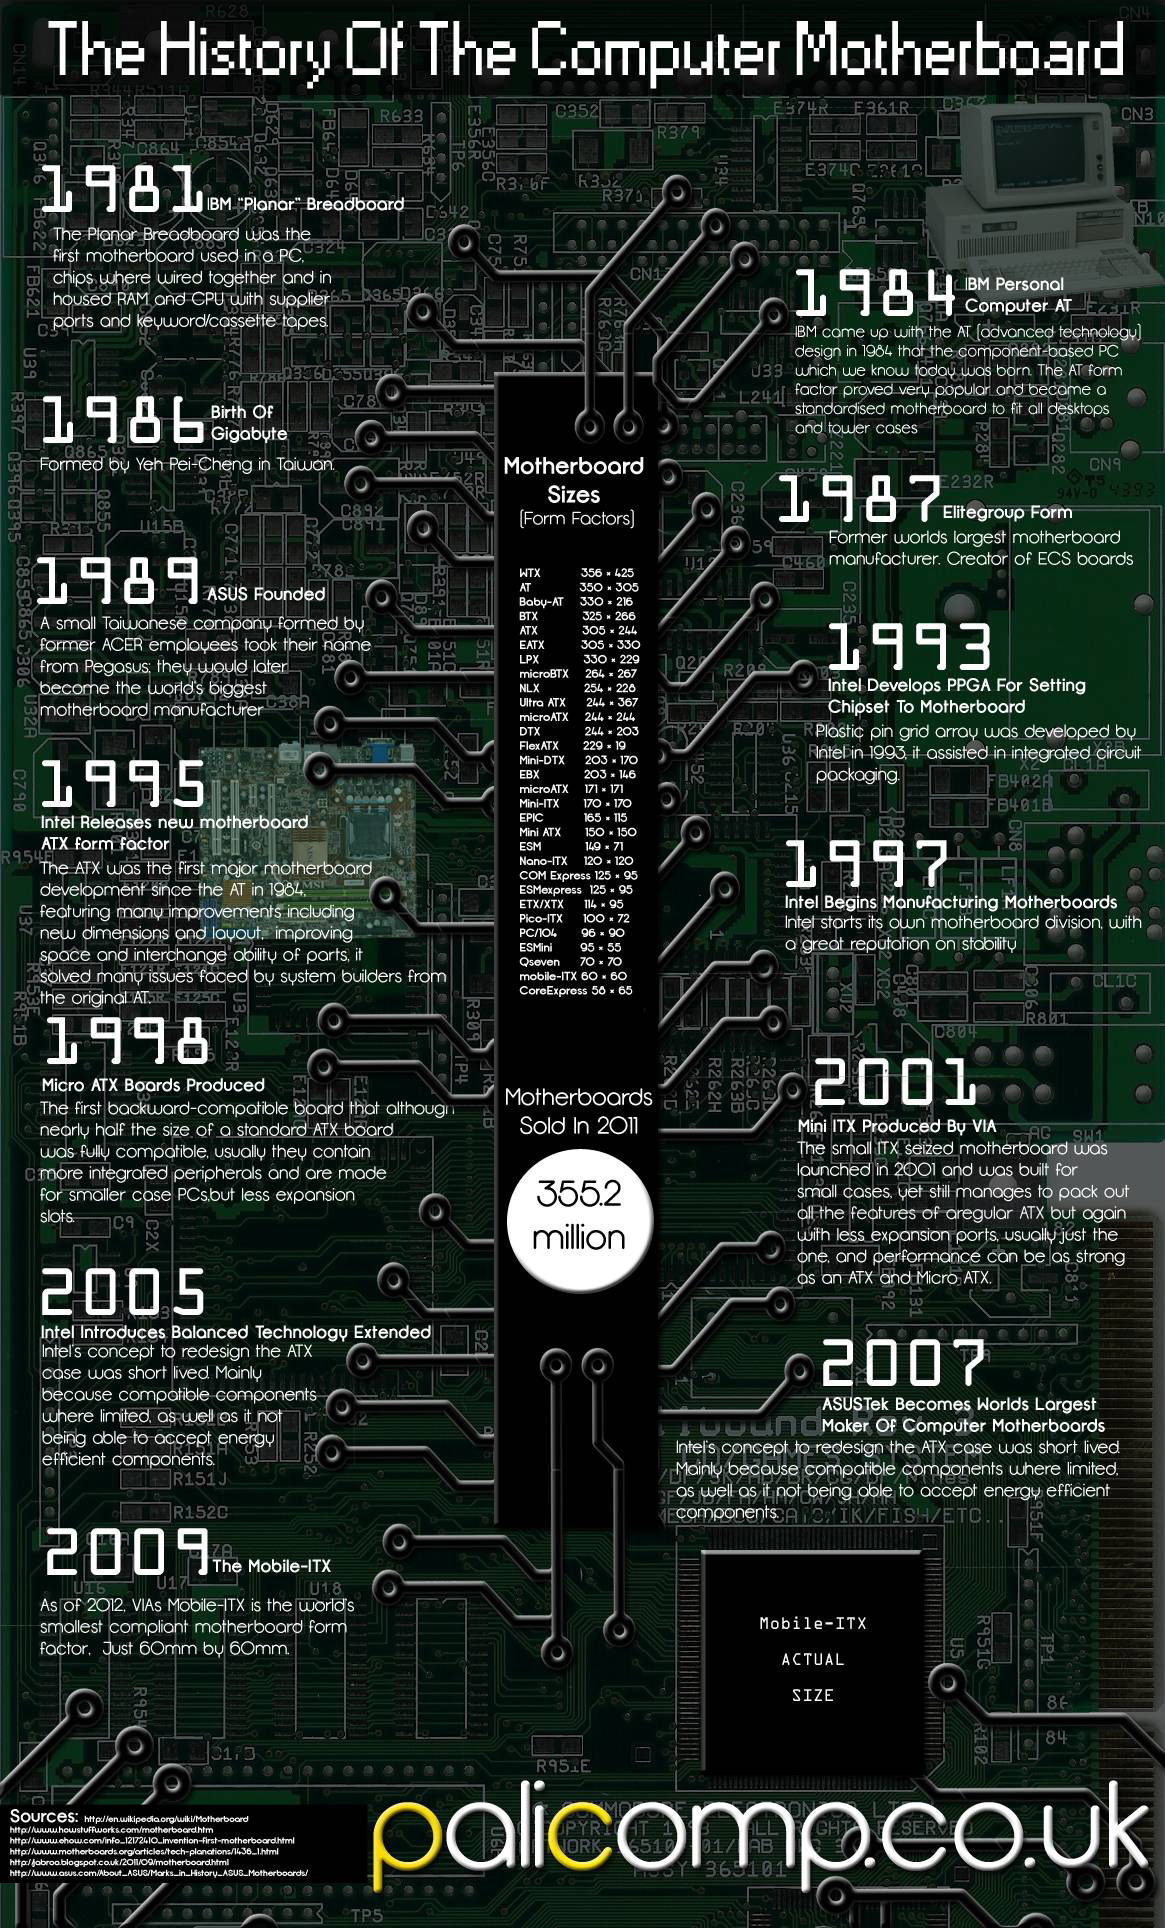 The History Of The Motherboard